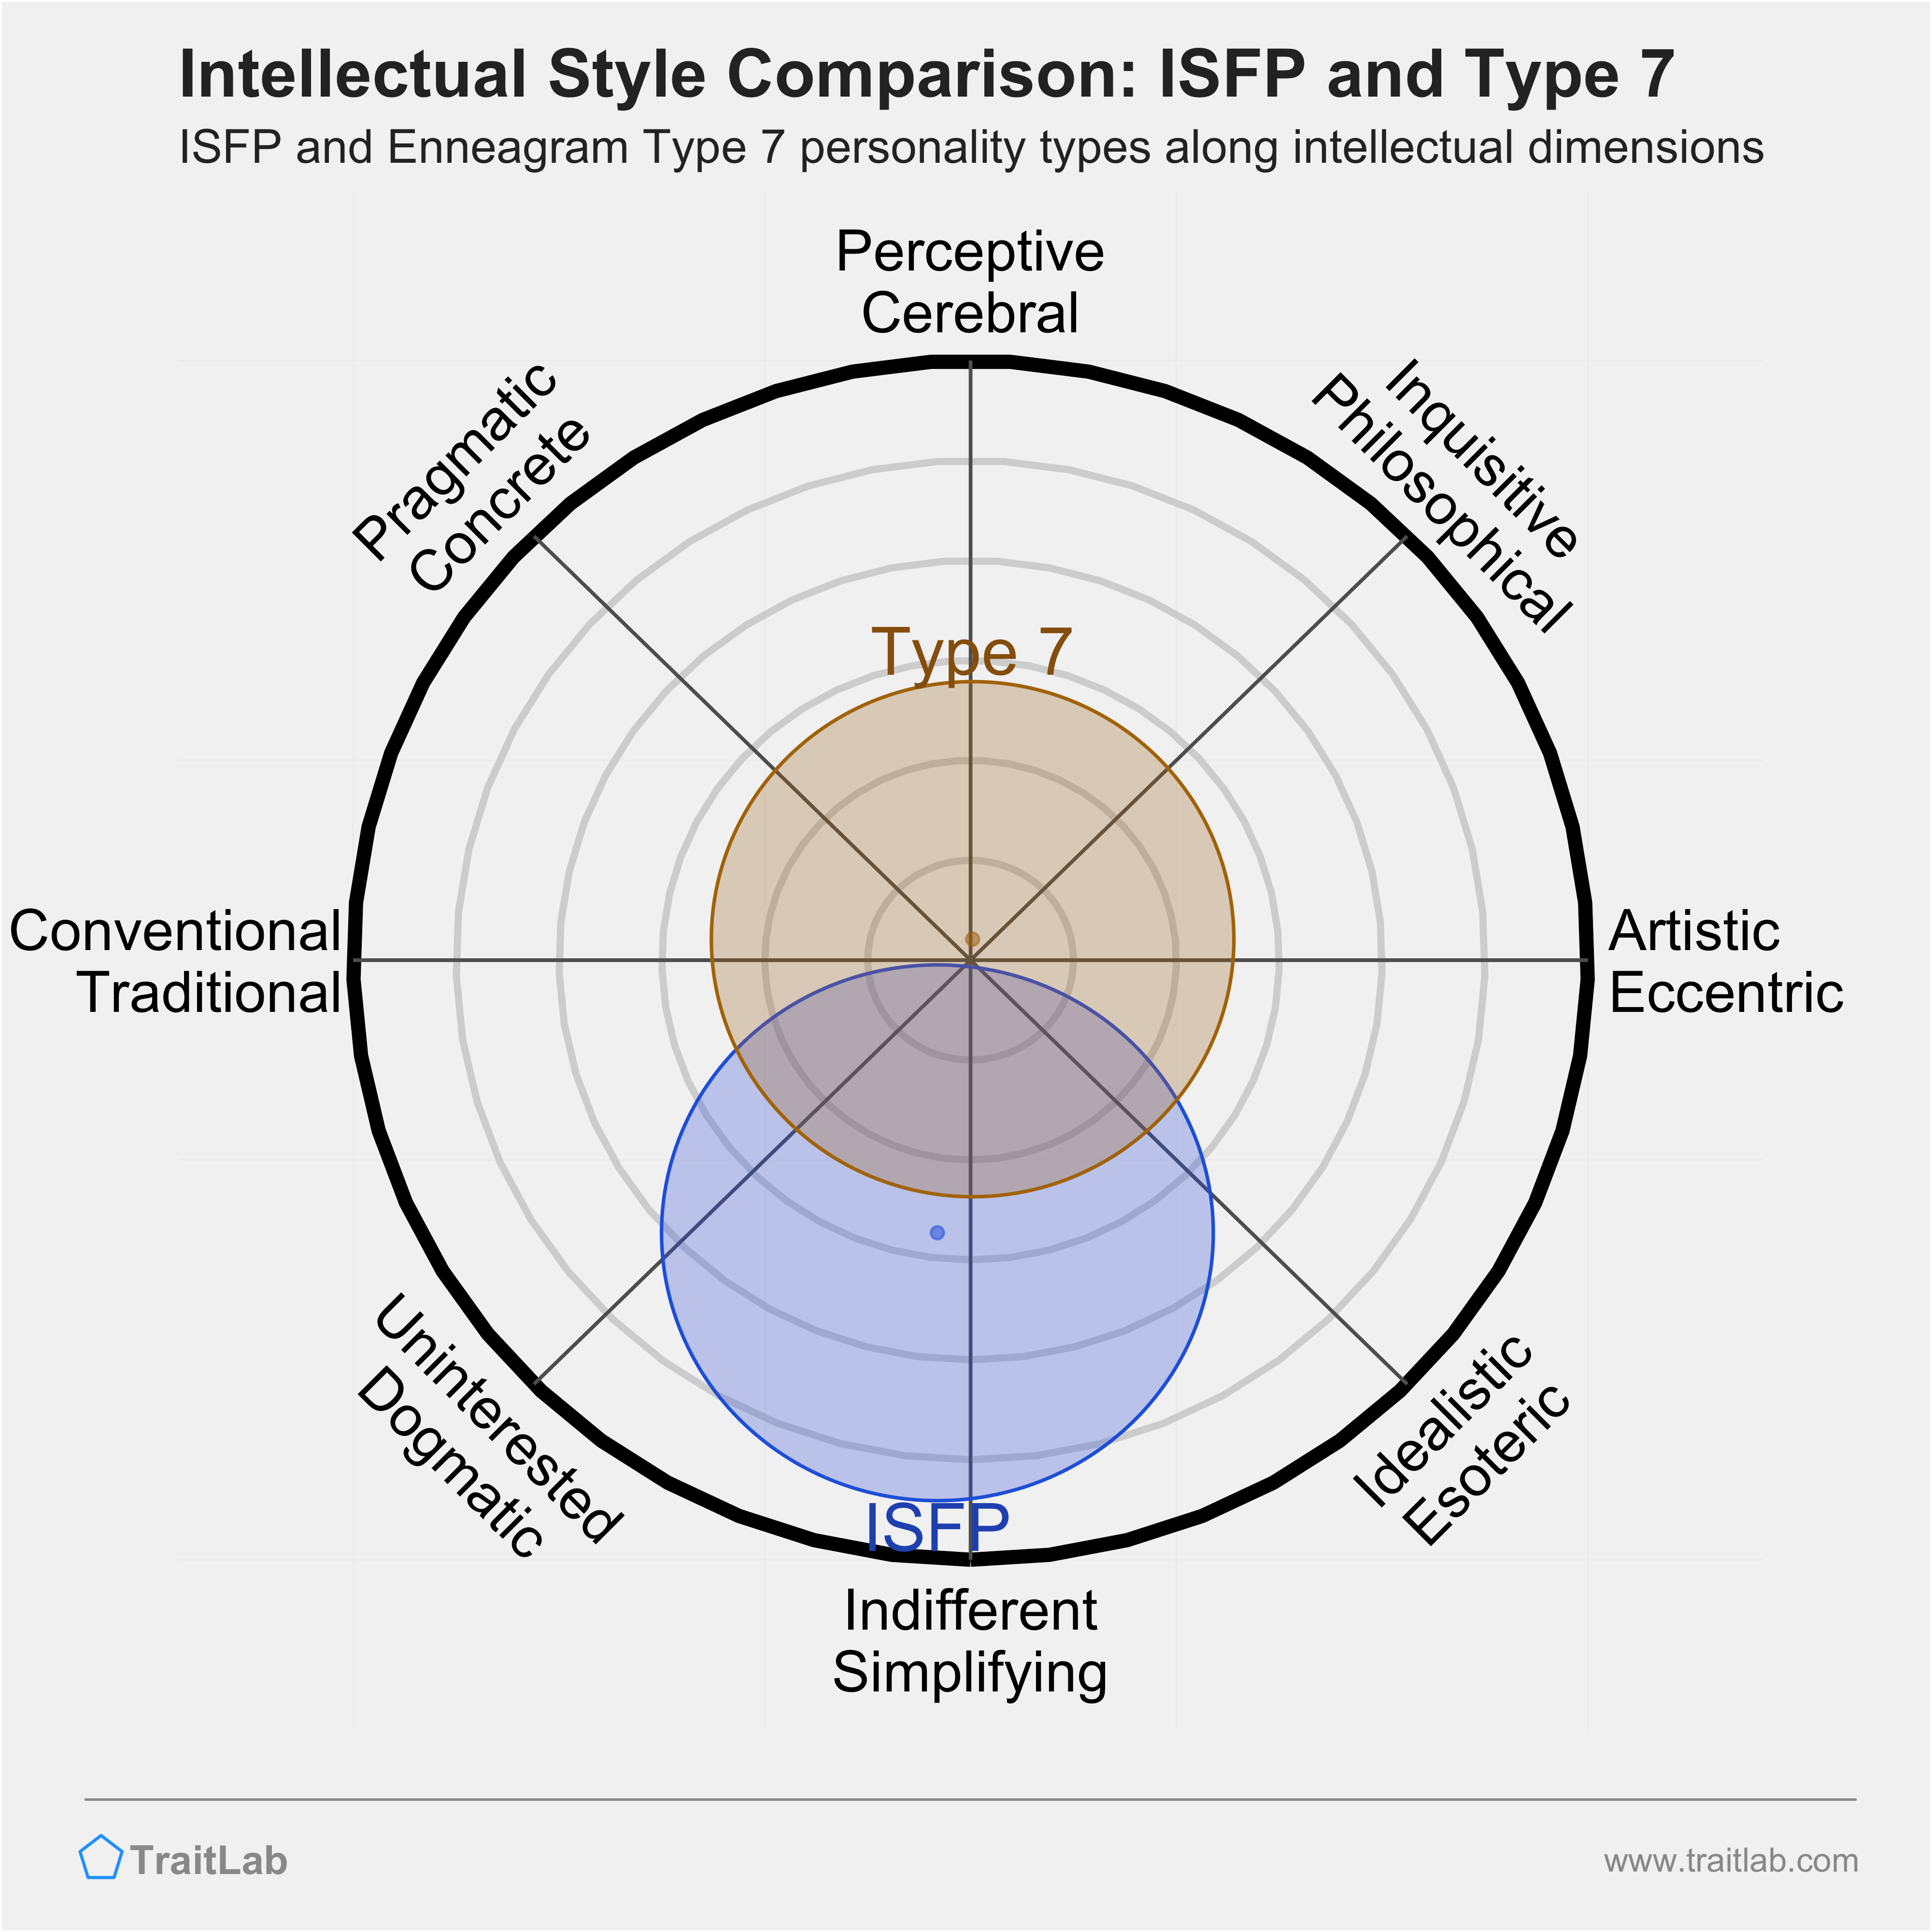 ISFP and Type 7 comparison across intellectual dimensions